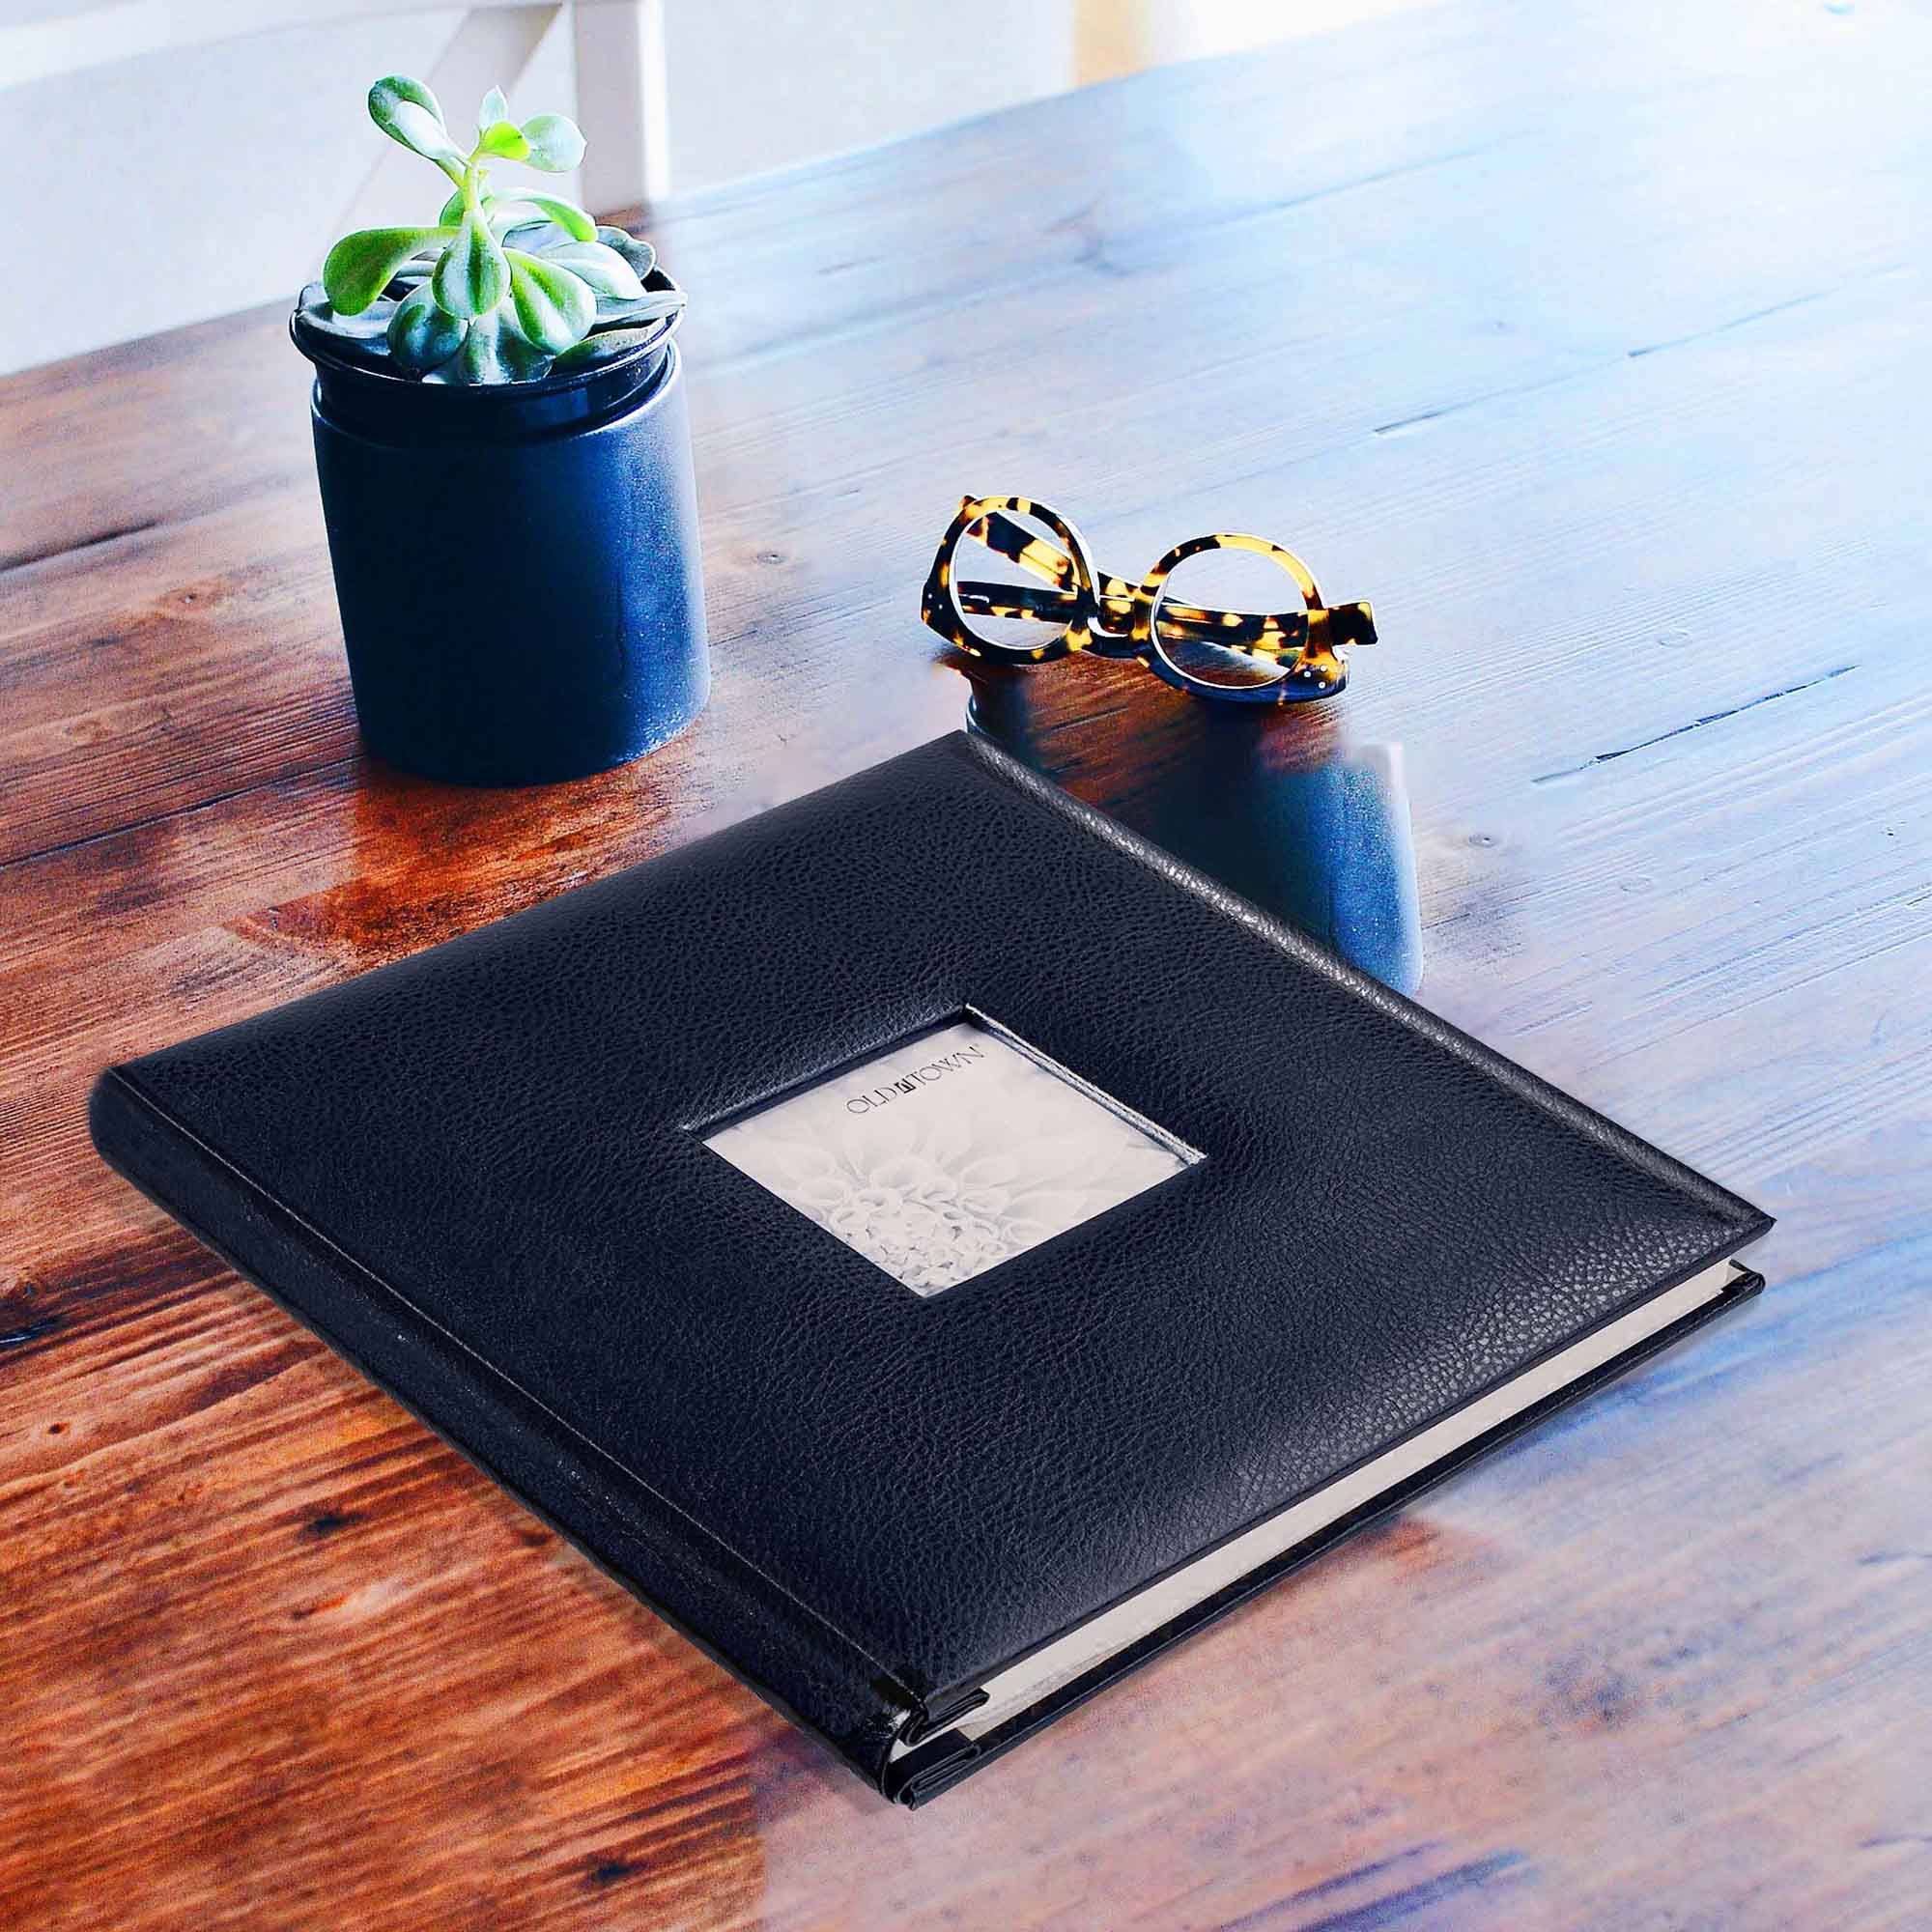 AMC Project Life 4x4 Album Leather Black – A Work of Heart